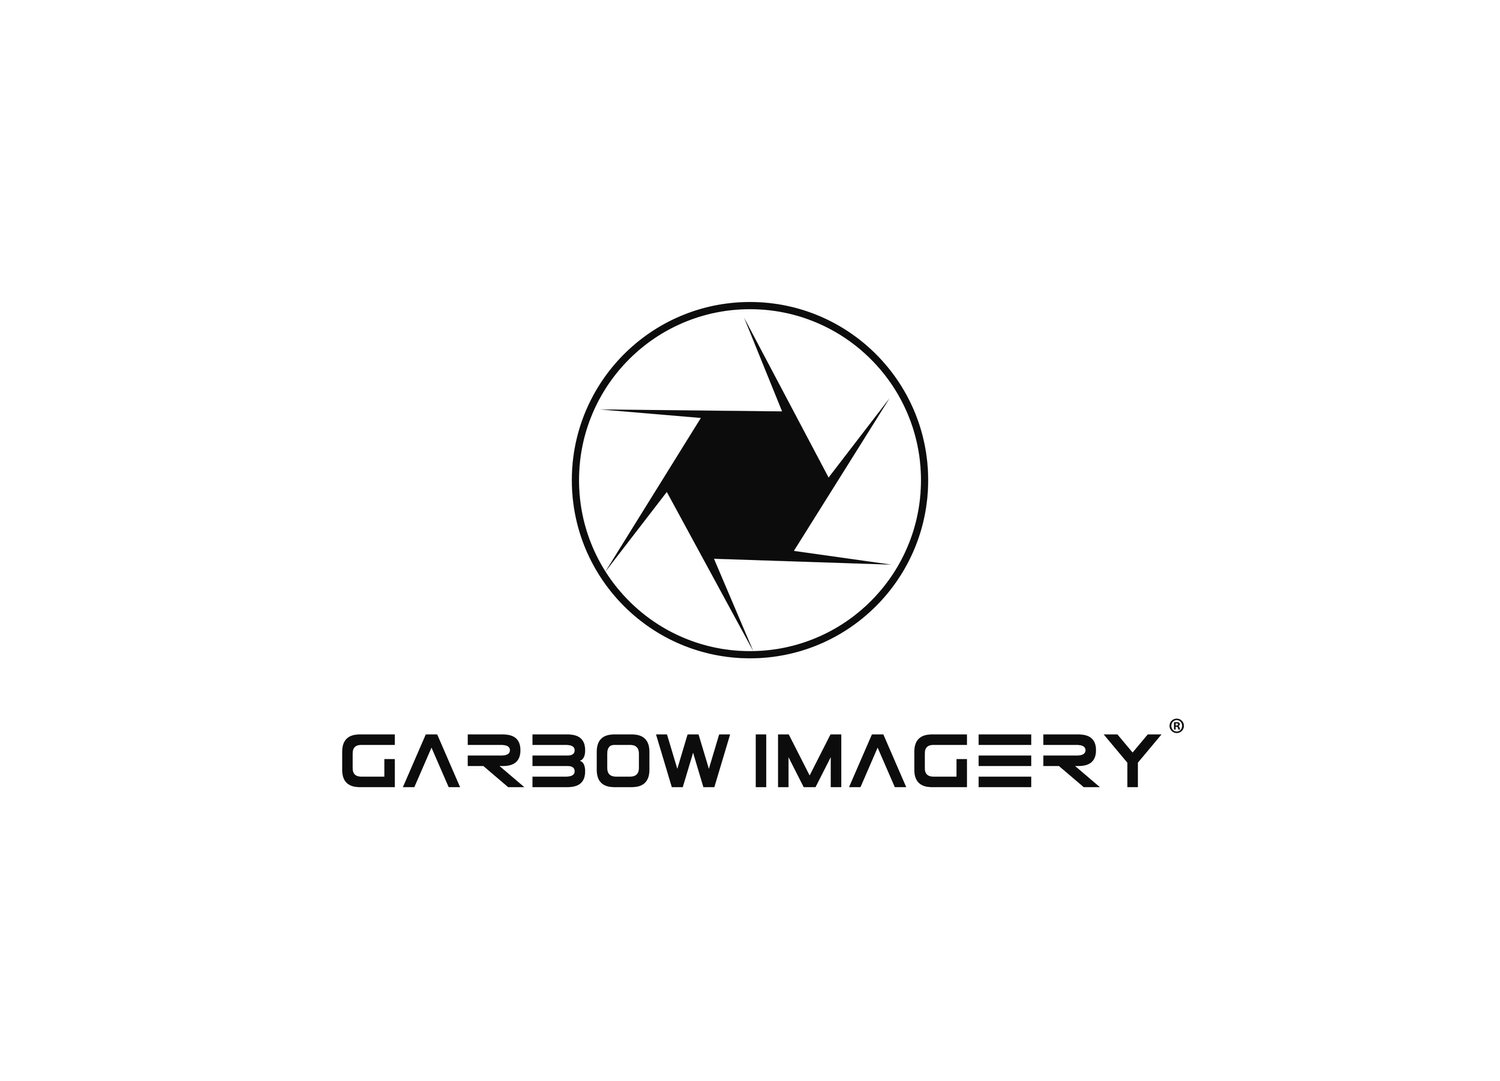 Garbow Imagery - Photography & Video servicing the Twin Cities and Metro Area